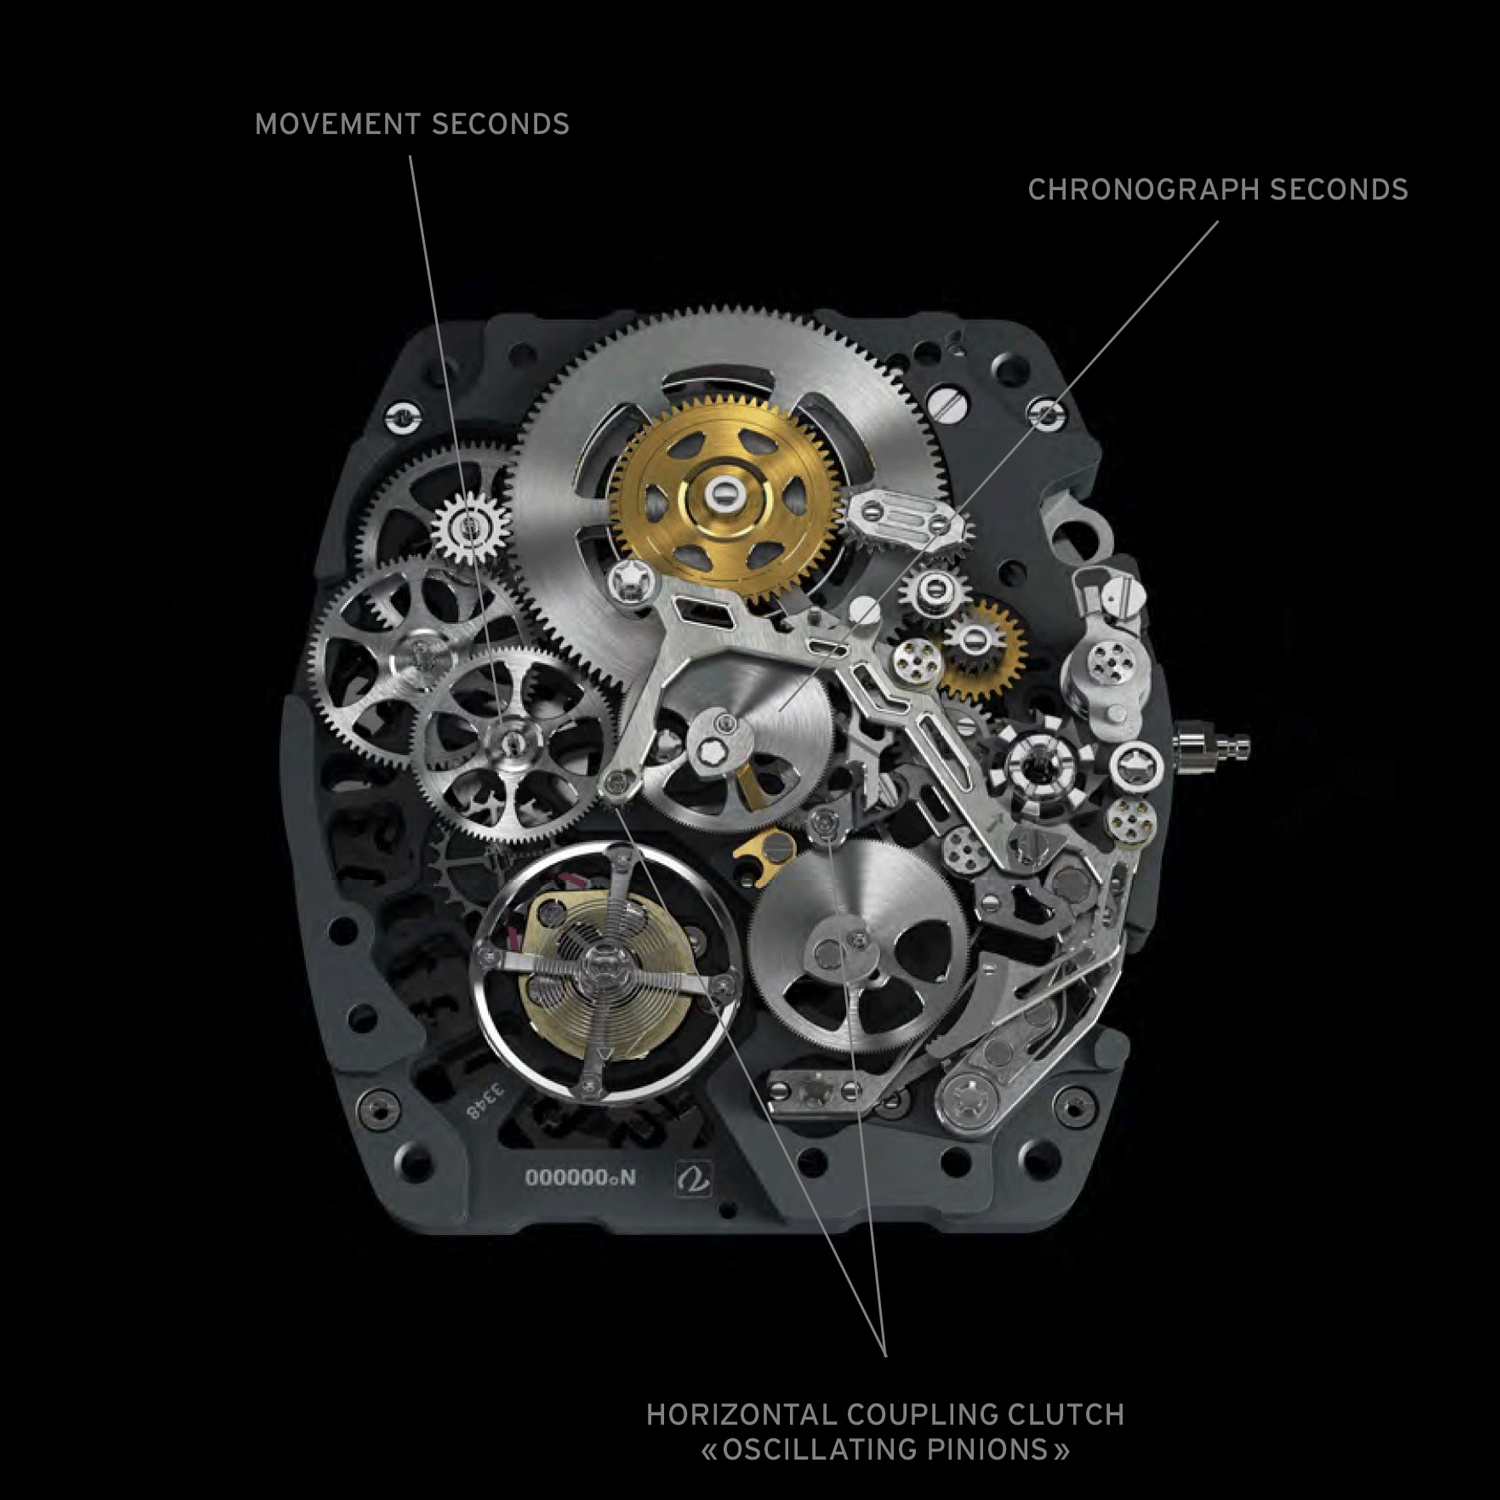 Tthe calibre CRMC1 is he first chronograph in the world with two oscillating pinions incorporated